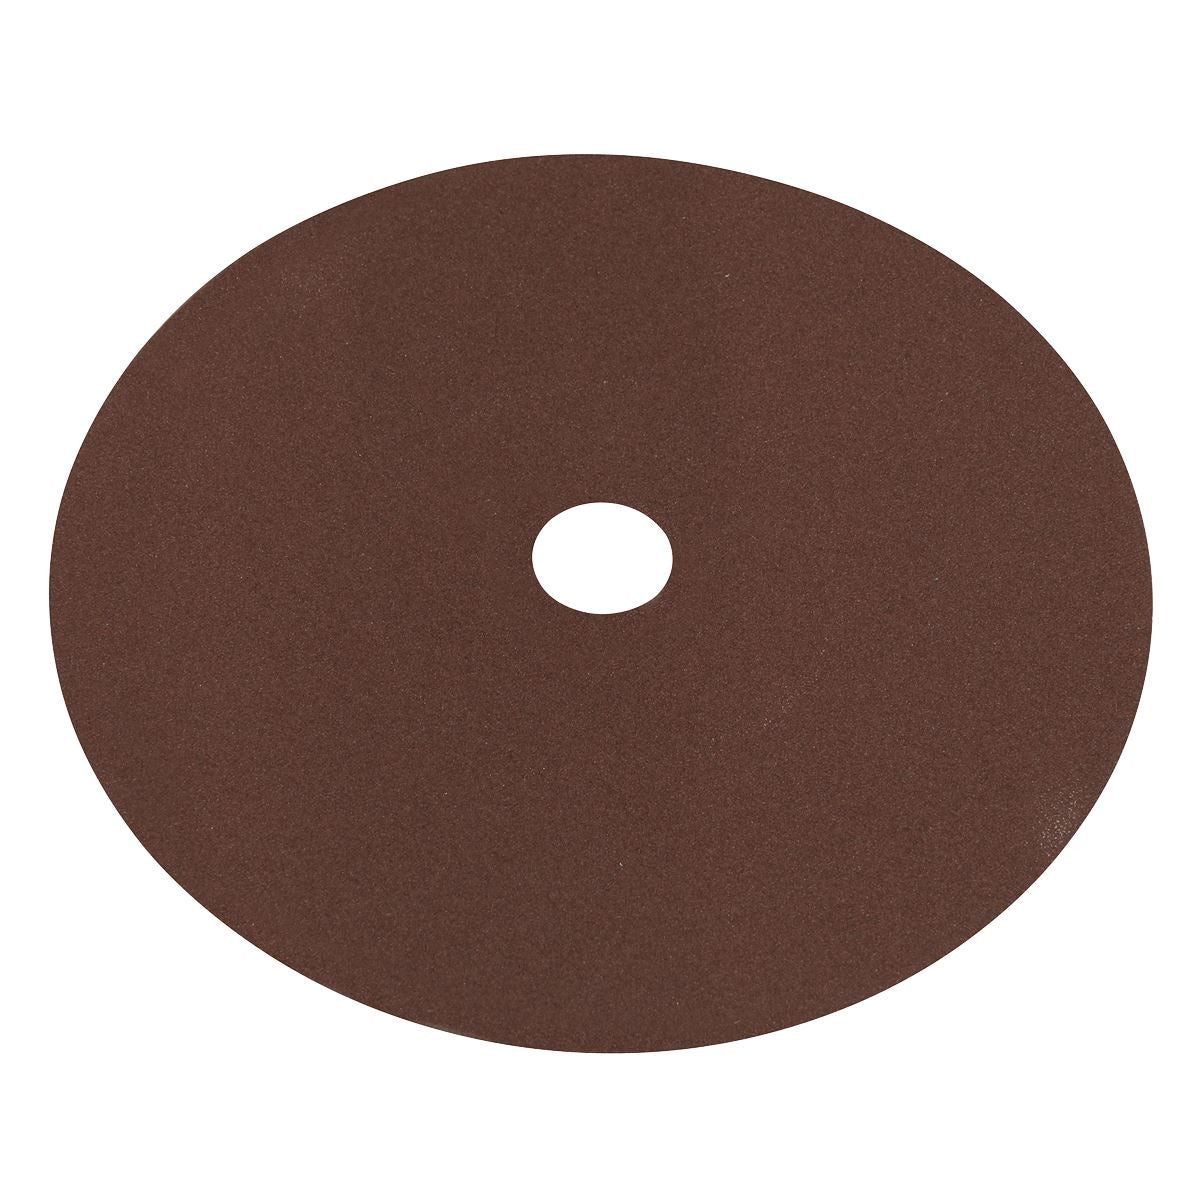 Worksafe by Sealey Fibre Backed Disc Ø175mm - 120Grit Pack of 25